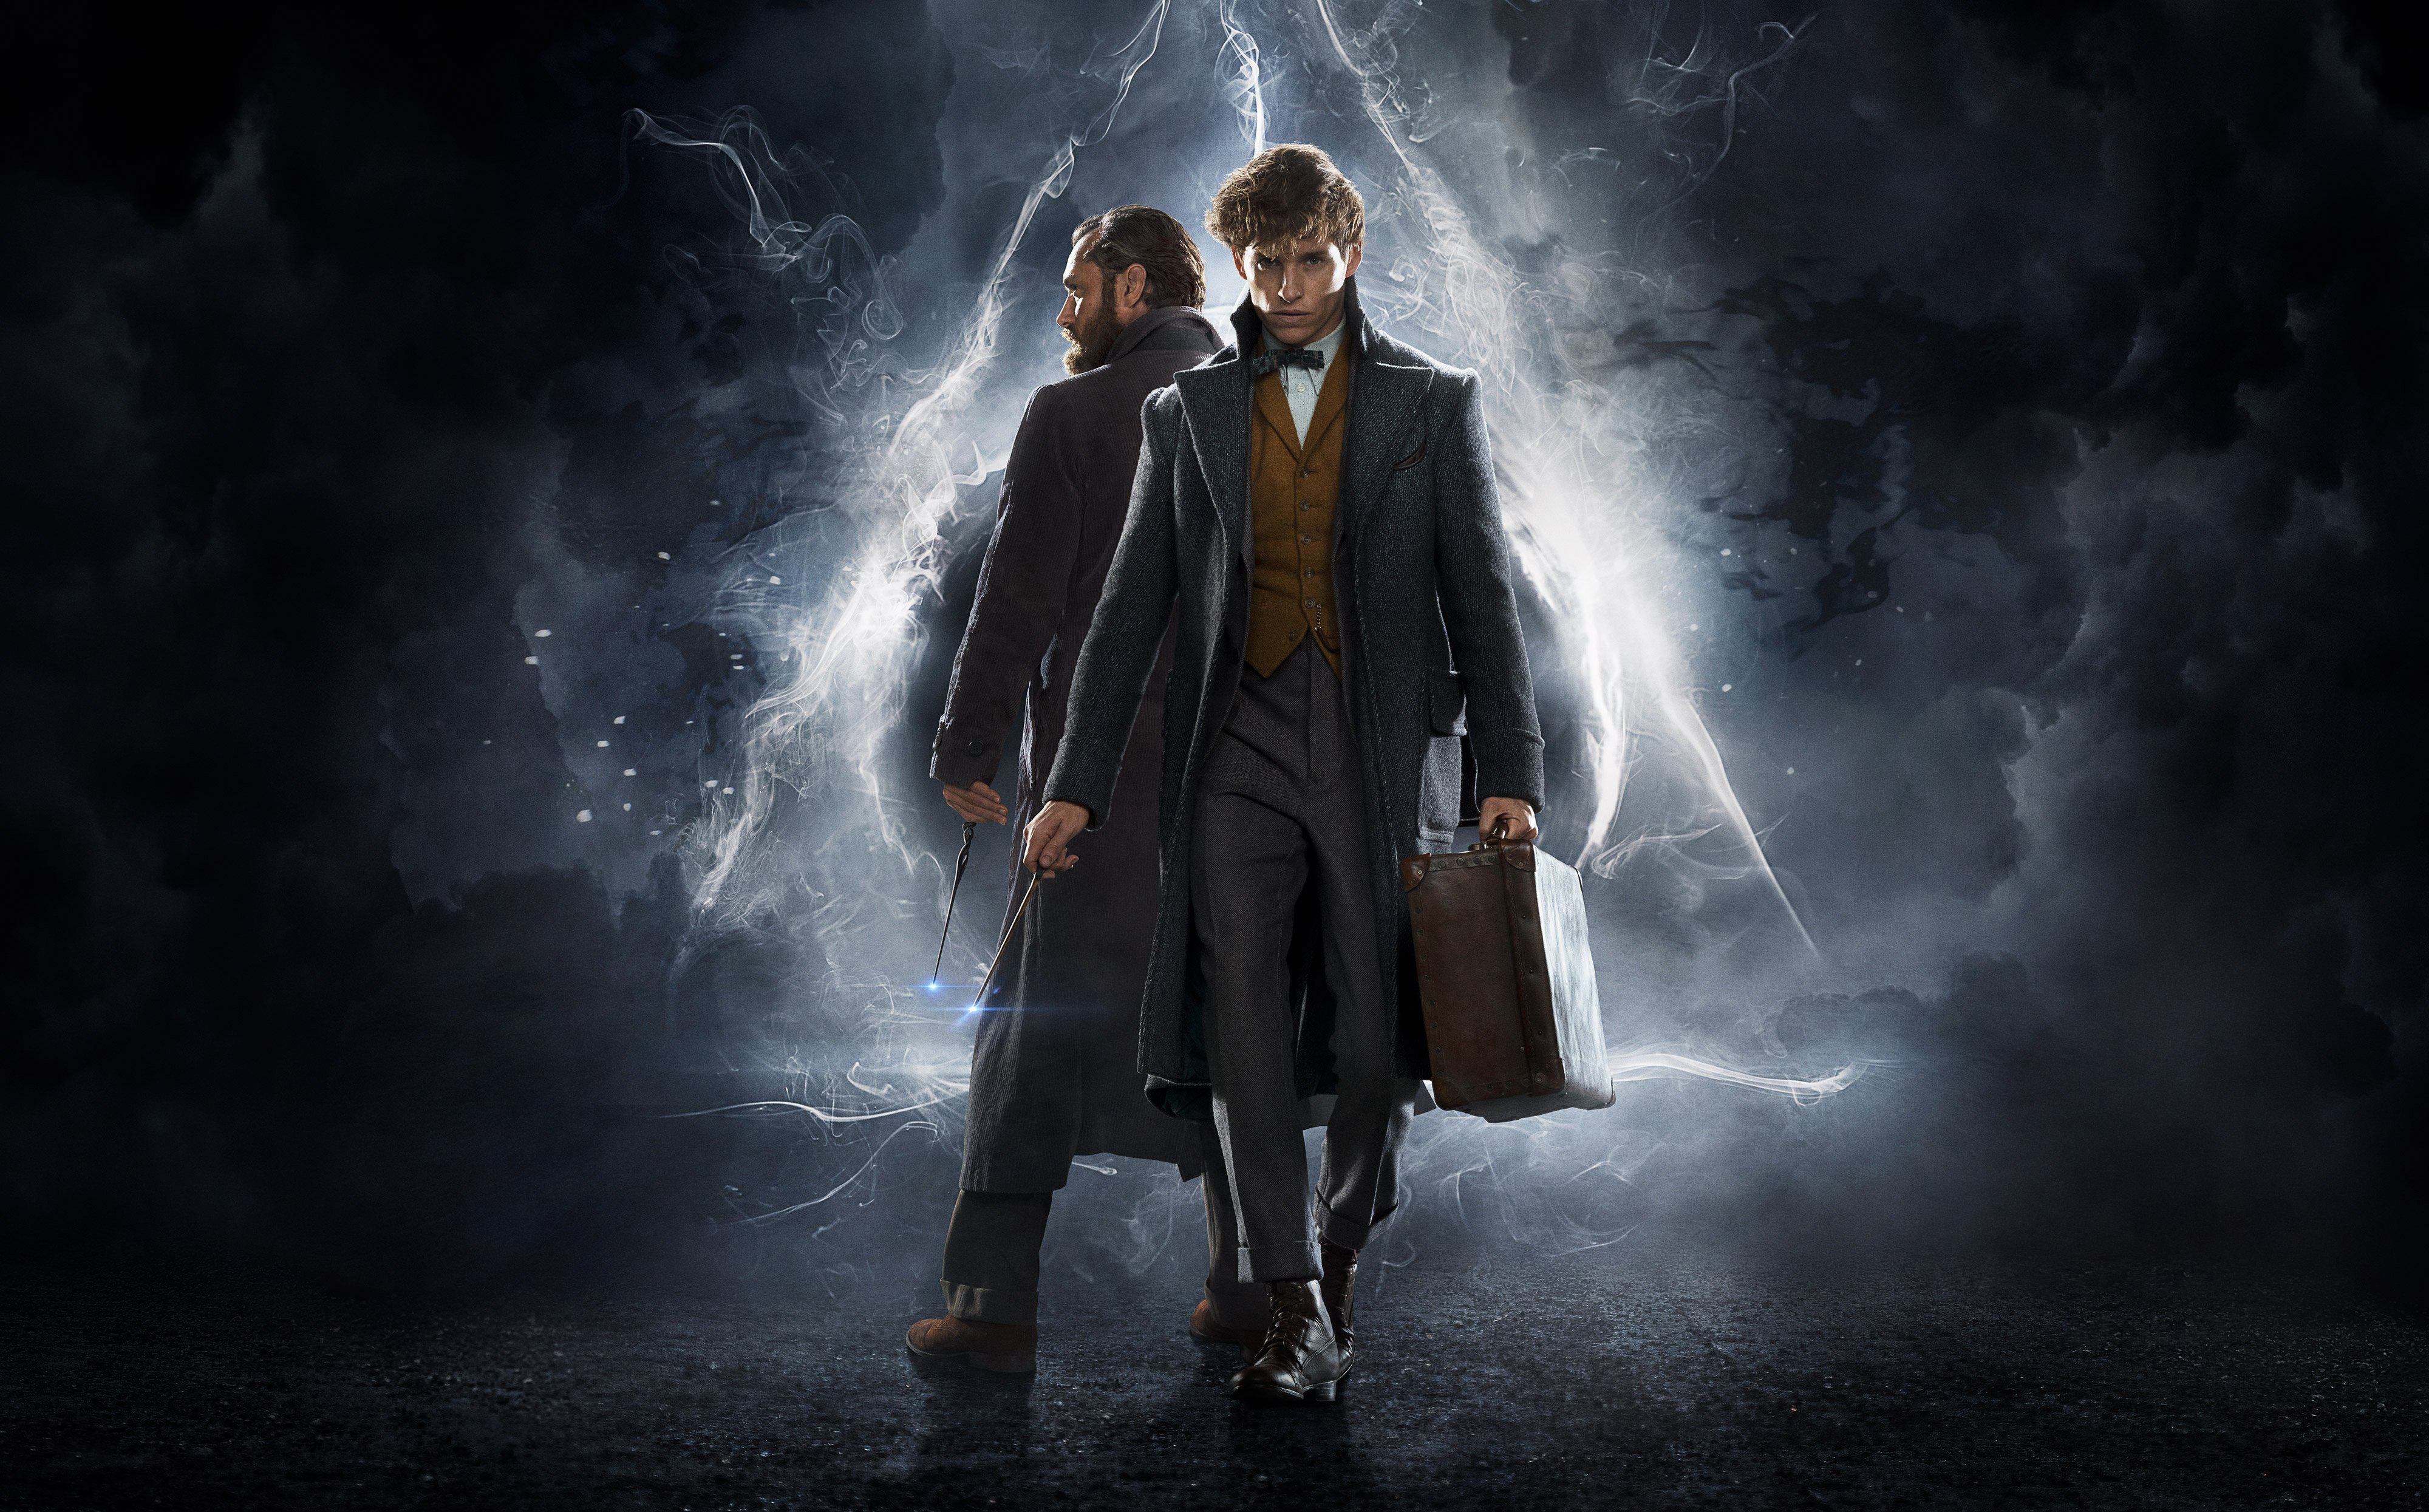 Movie Fantastic Beasts: The Crimes of Grindelwald HD Wallpaper | Background Image